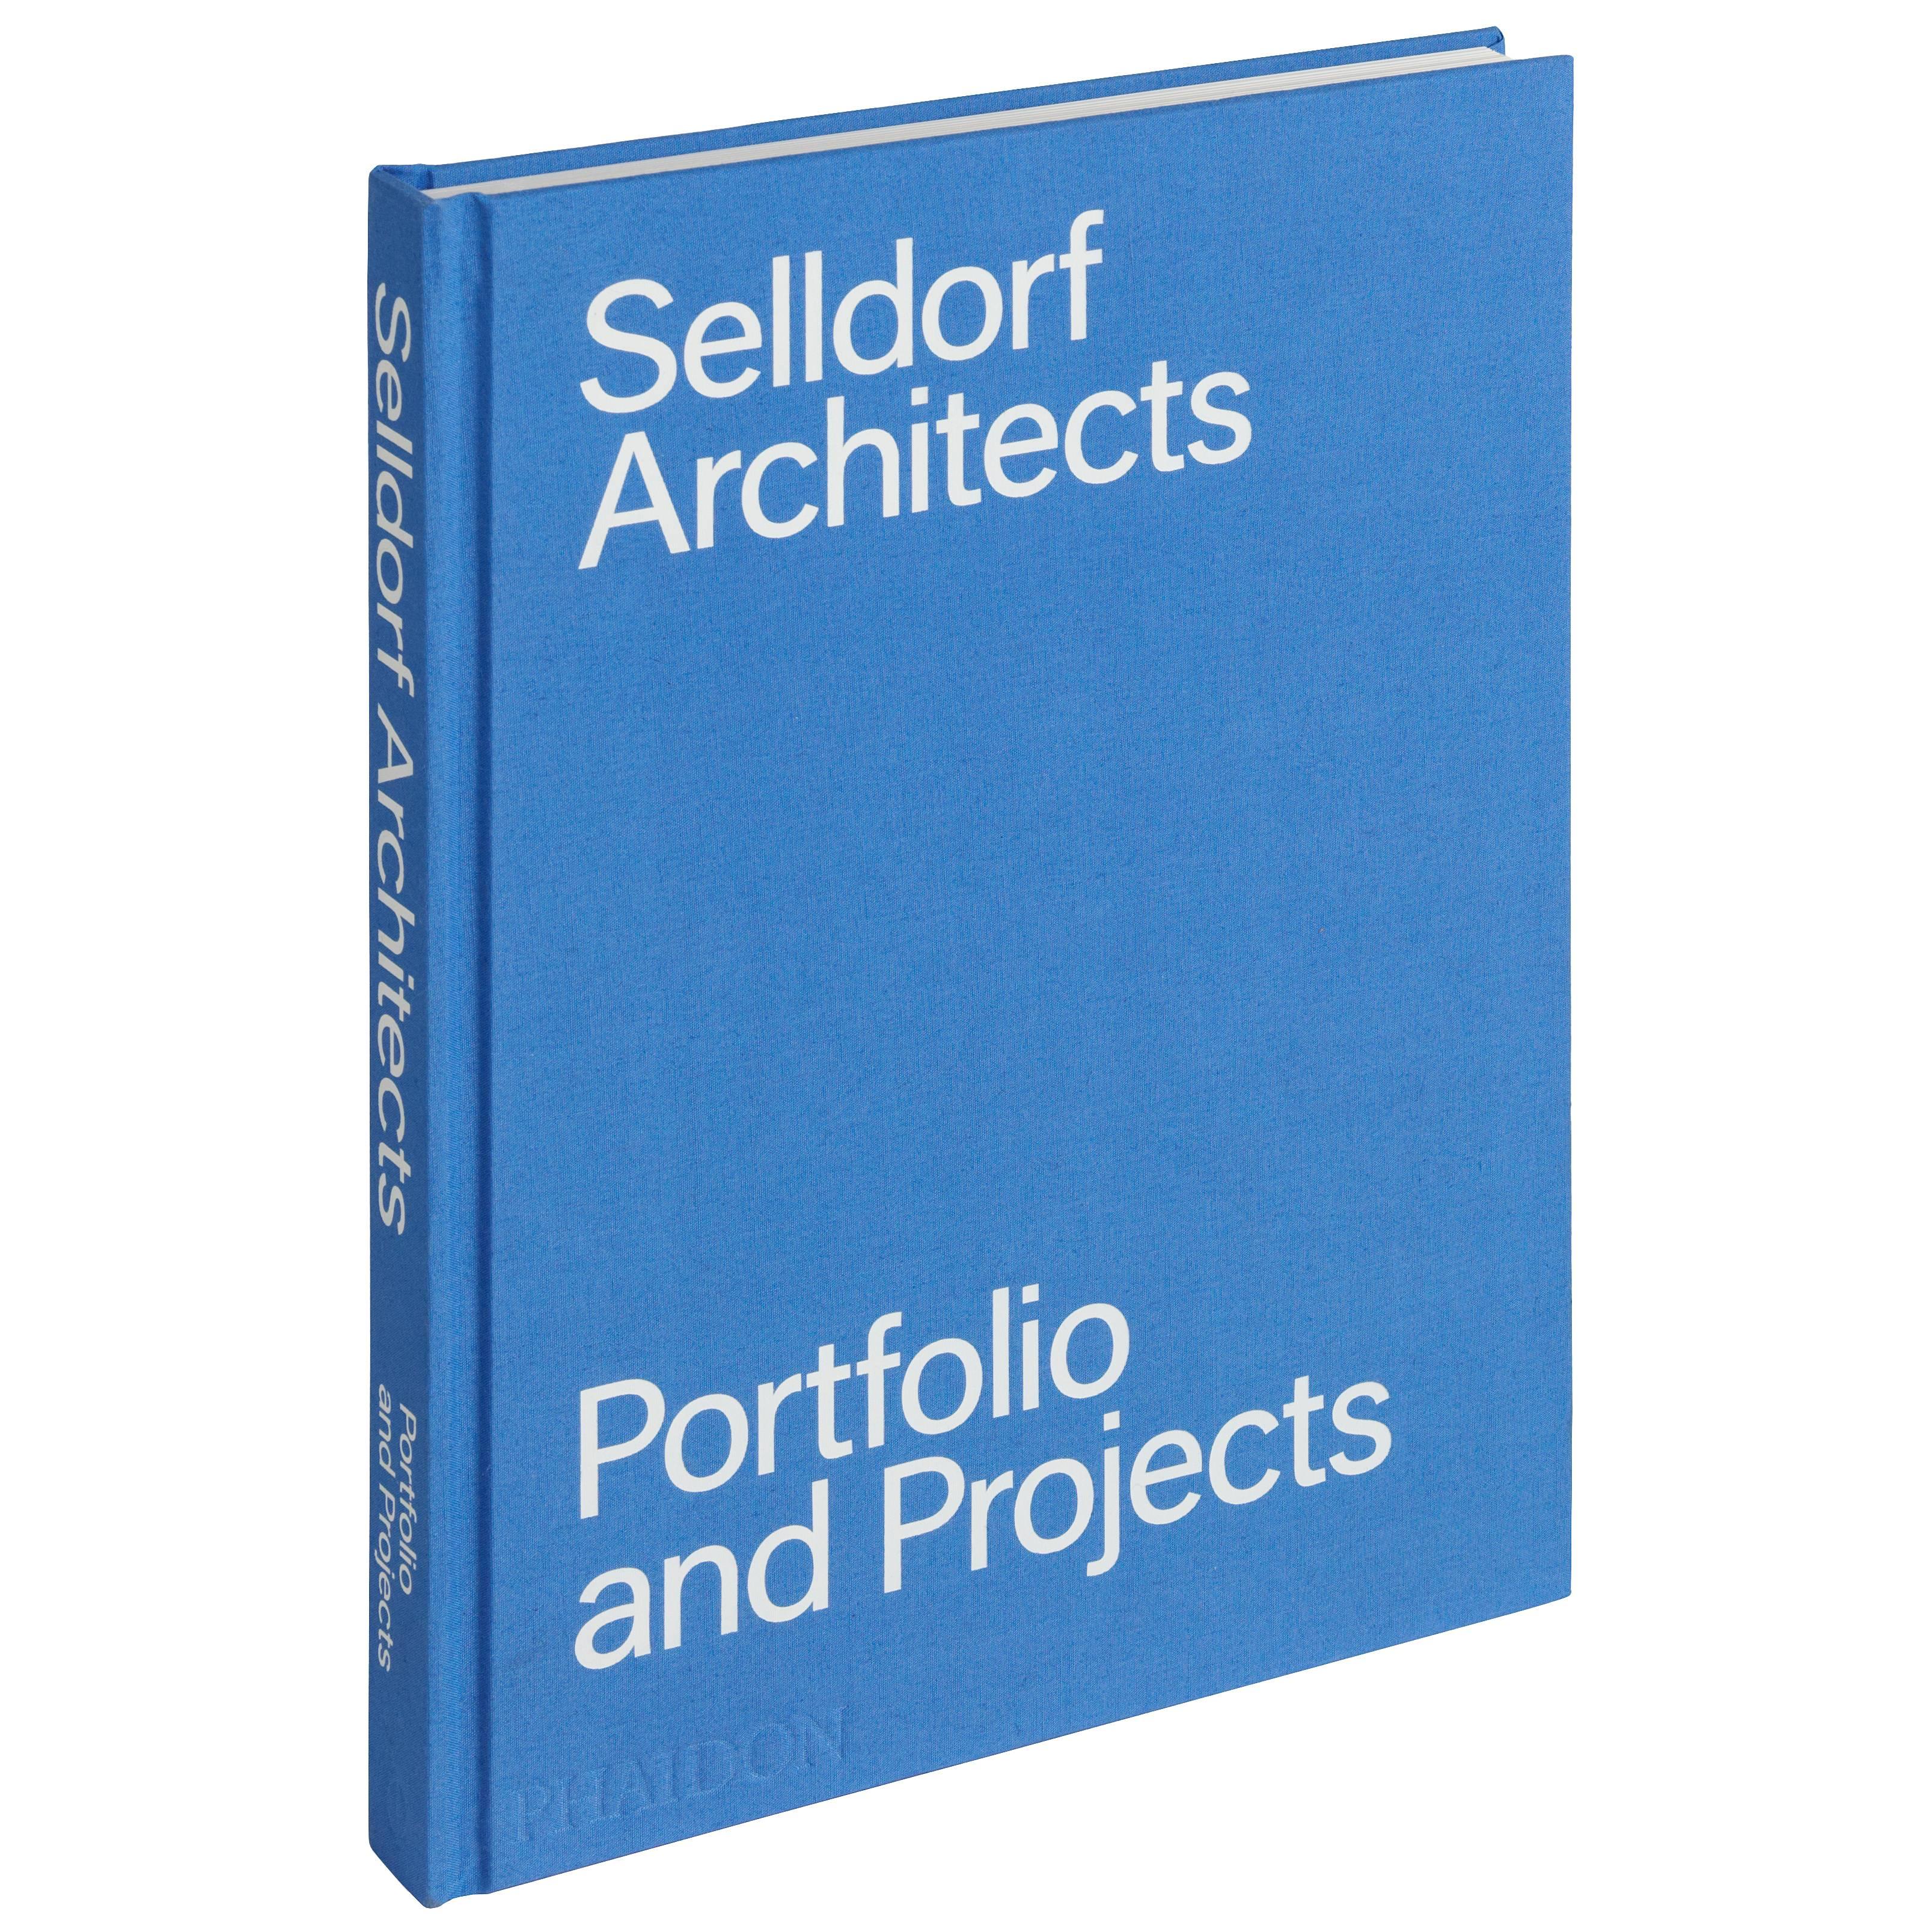 Selldorf Architects Portfolio and Projects, Buch im Angebot